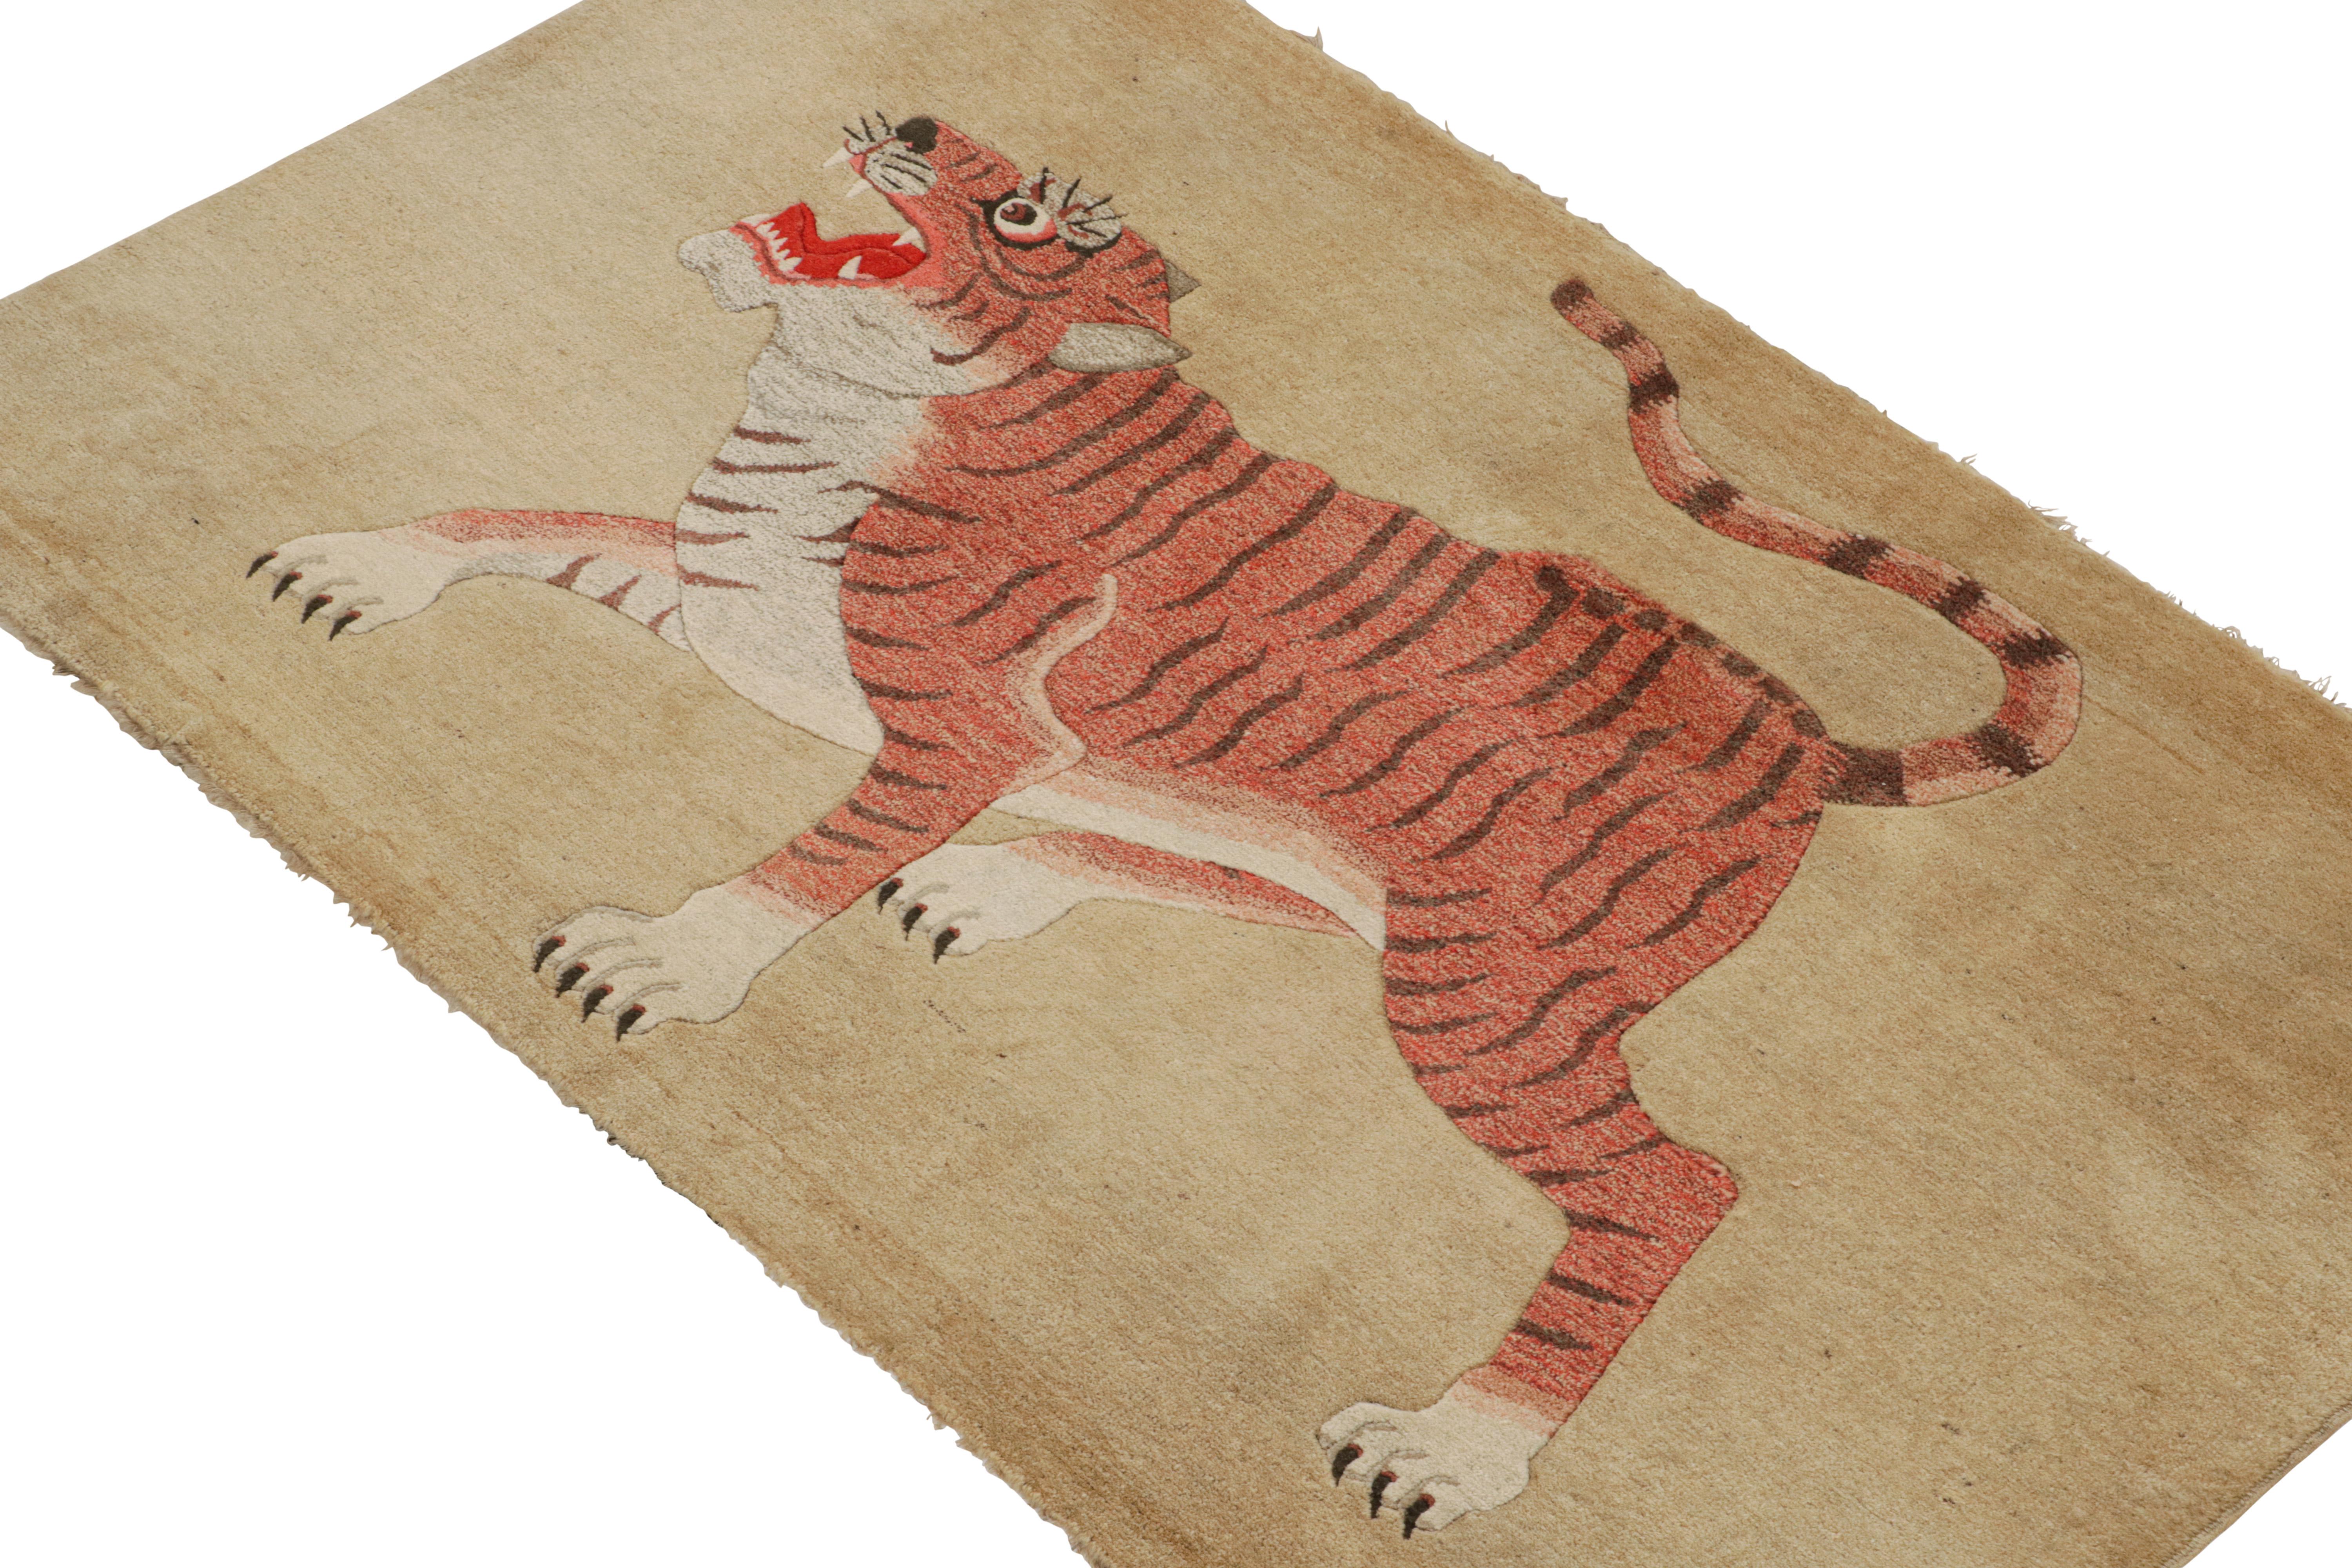 German Antique Tiger Runner Rug in Beige-Brown with Red Pictorial, from Rug & Kilim For Sale